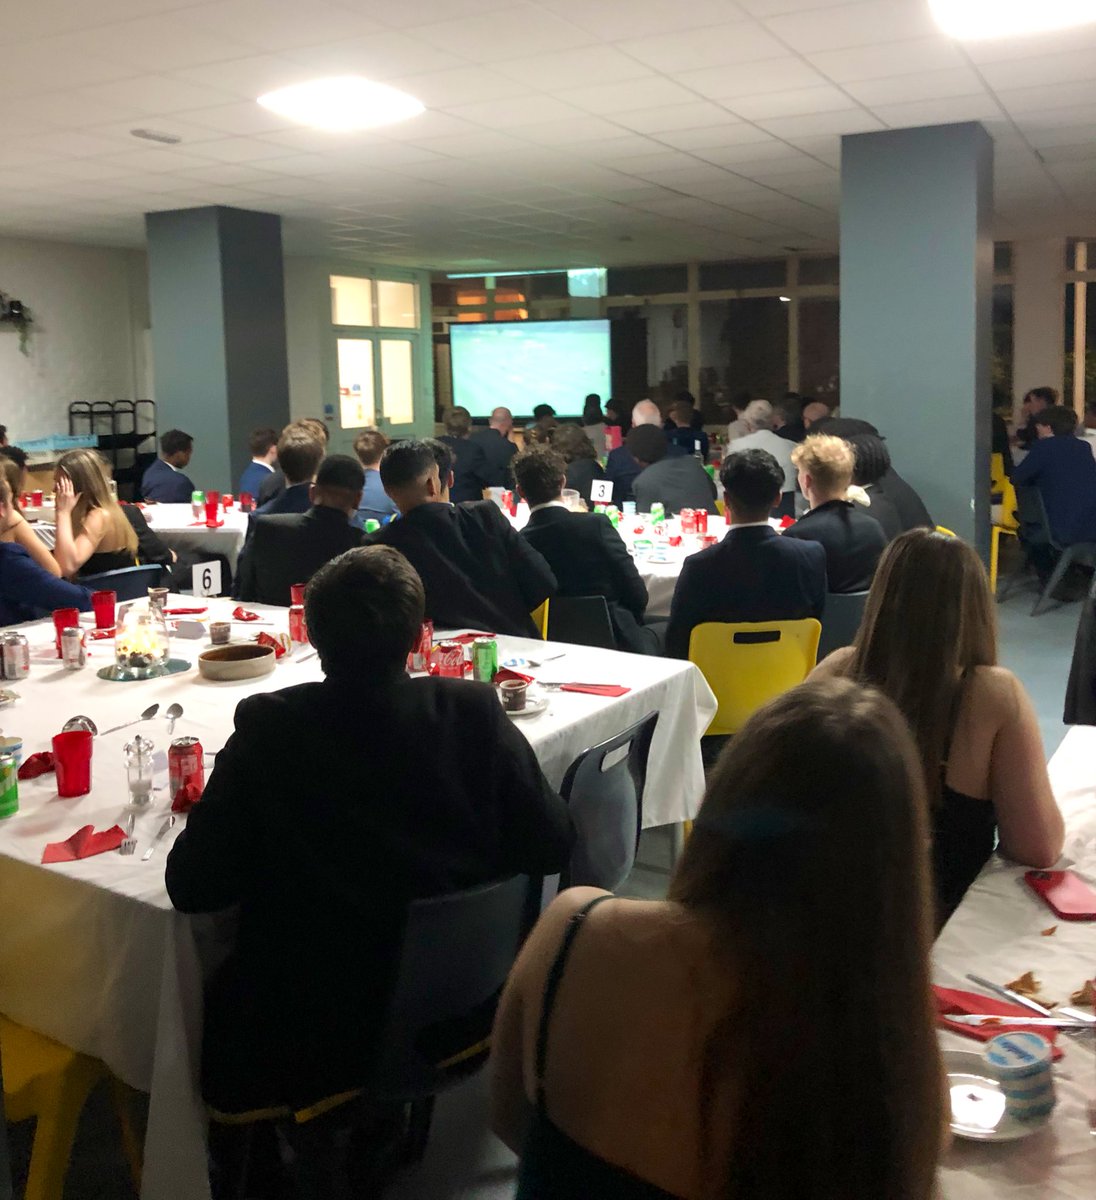 📸 ➡️ @OratoryFootball & @OratoryNetball 🎤 Dinner from last night - congratulations to all the #OratoryPupils on their achievements 🥇🥈🥉 🏆 &, as always, thank you to our wonderful #OratoryStaff for their commitment & support to #OratorySport this term 🙌🏼🙌🏼 🟡⚫️